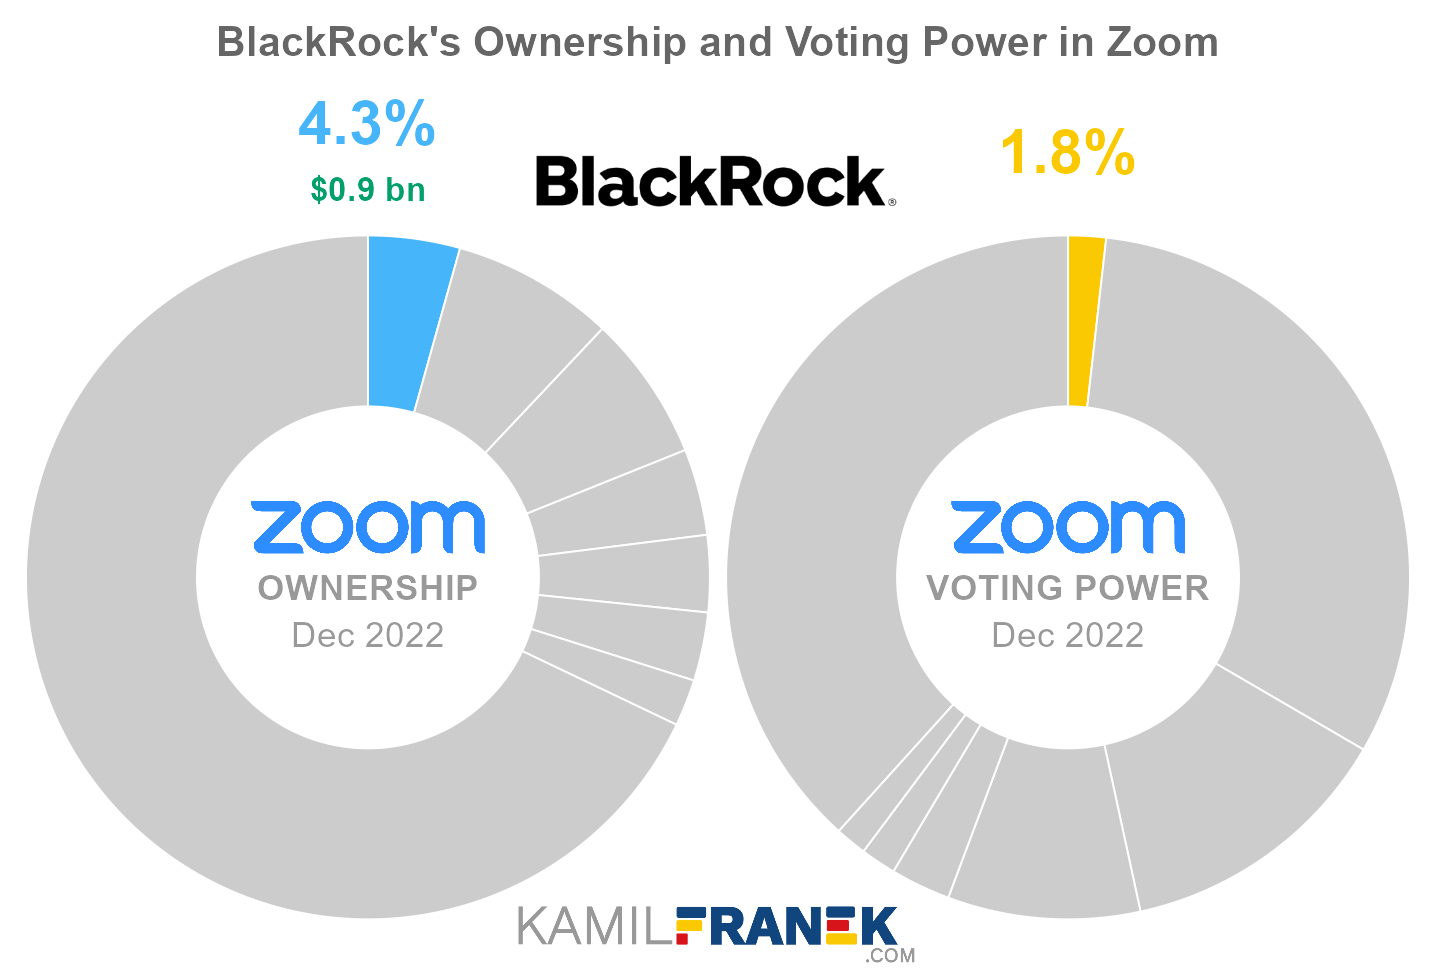 BlackRock's share ownership and voting power in Zoom (chart)